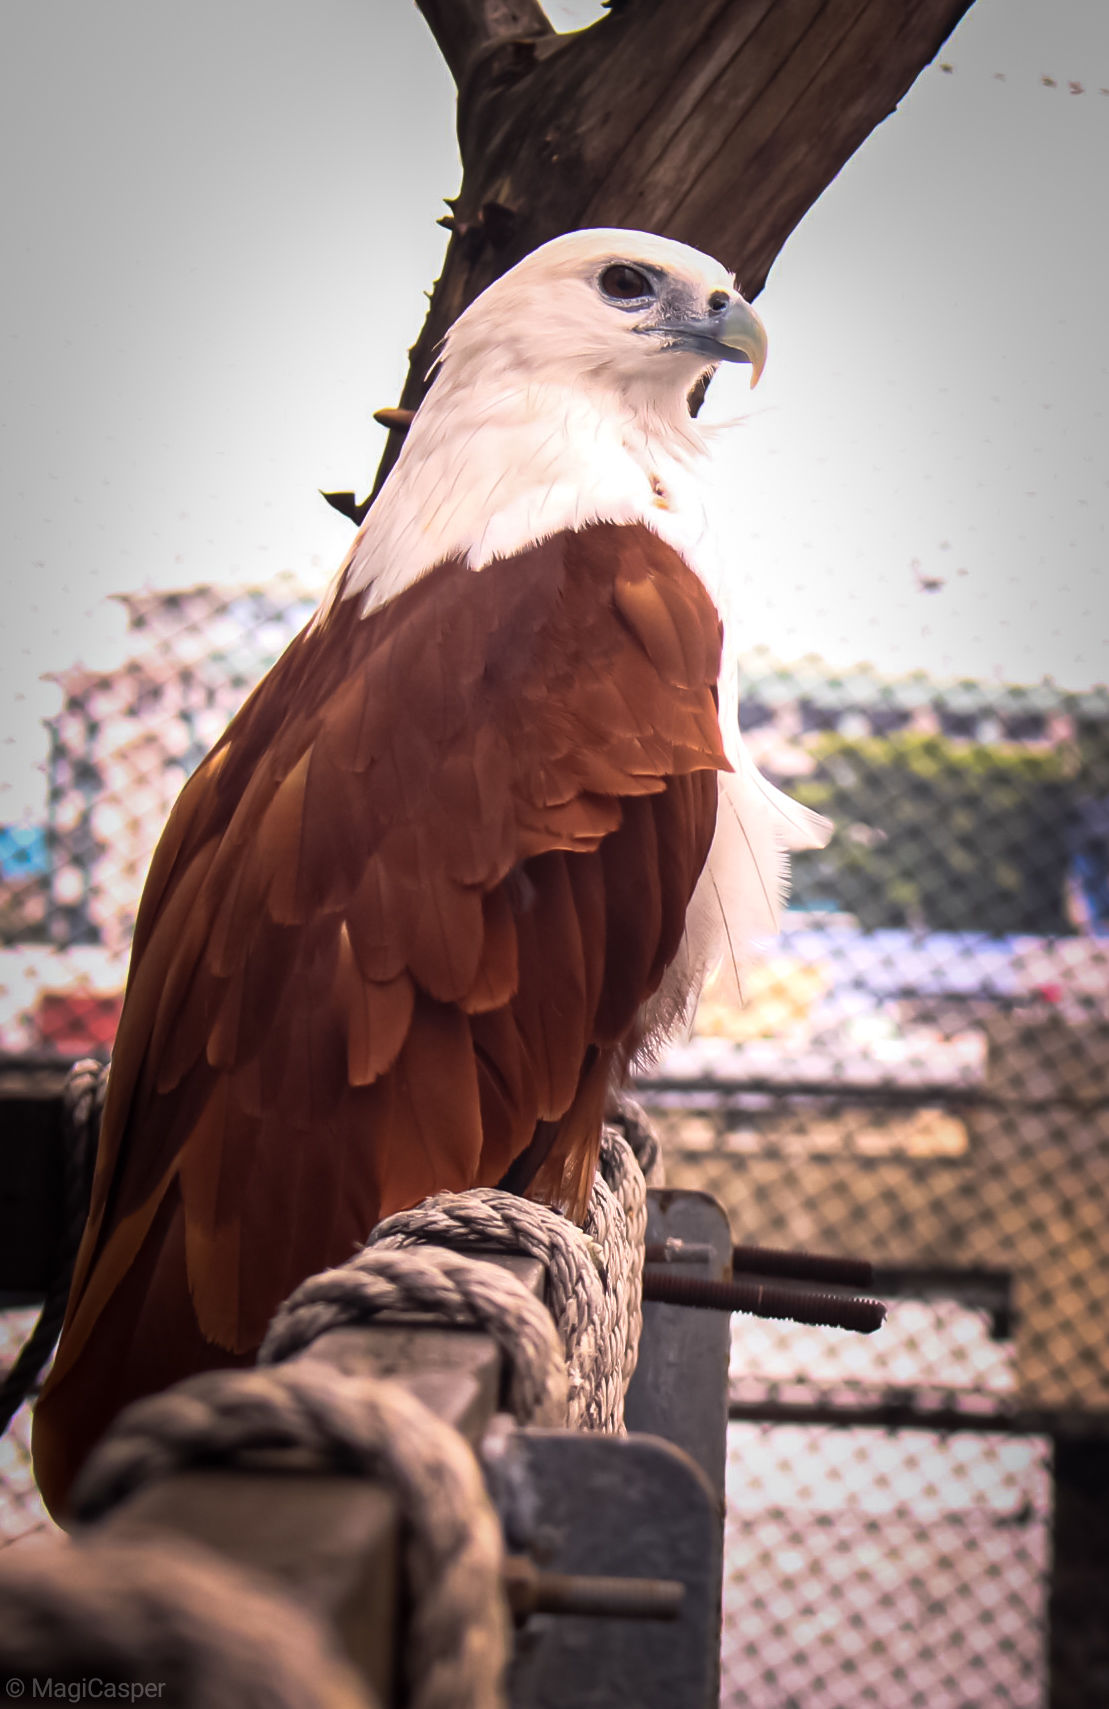 bird, animal themes, vertebrate, animal, one animal, animal wildlife, animals in the wild, no people, perching, close-up, focus on foreground, day, bird of prey, parrot, beak, nature, feather, outdoors, looking, railing, eagle, wooden post